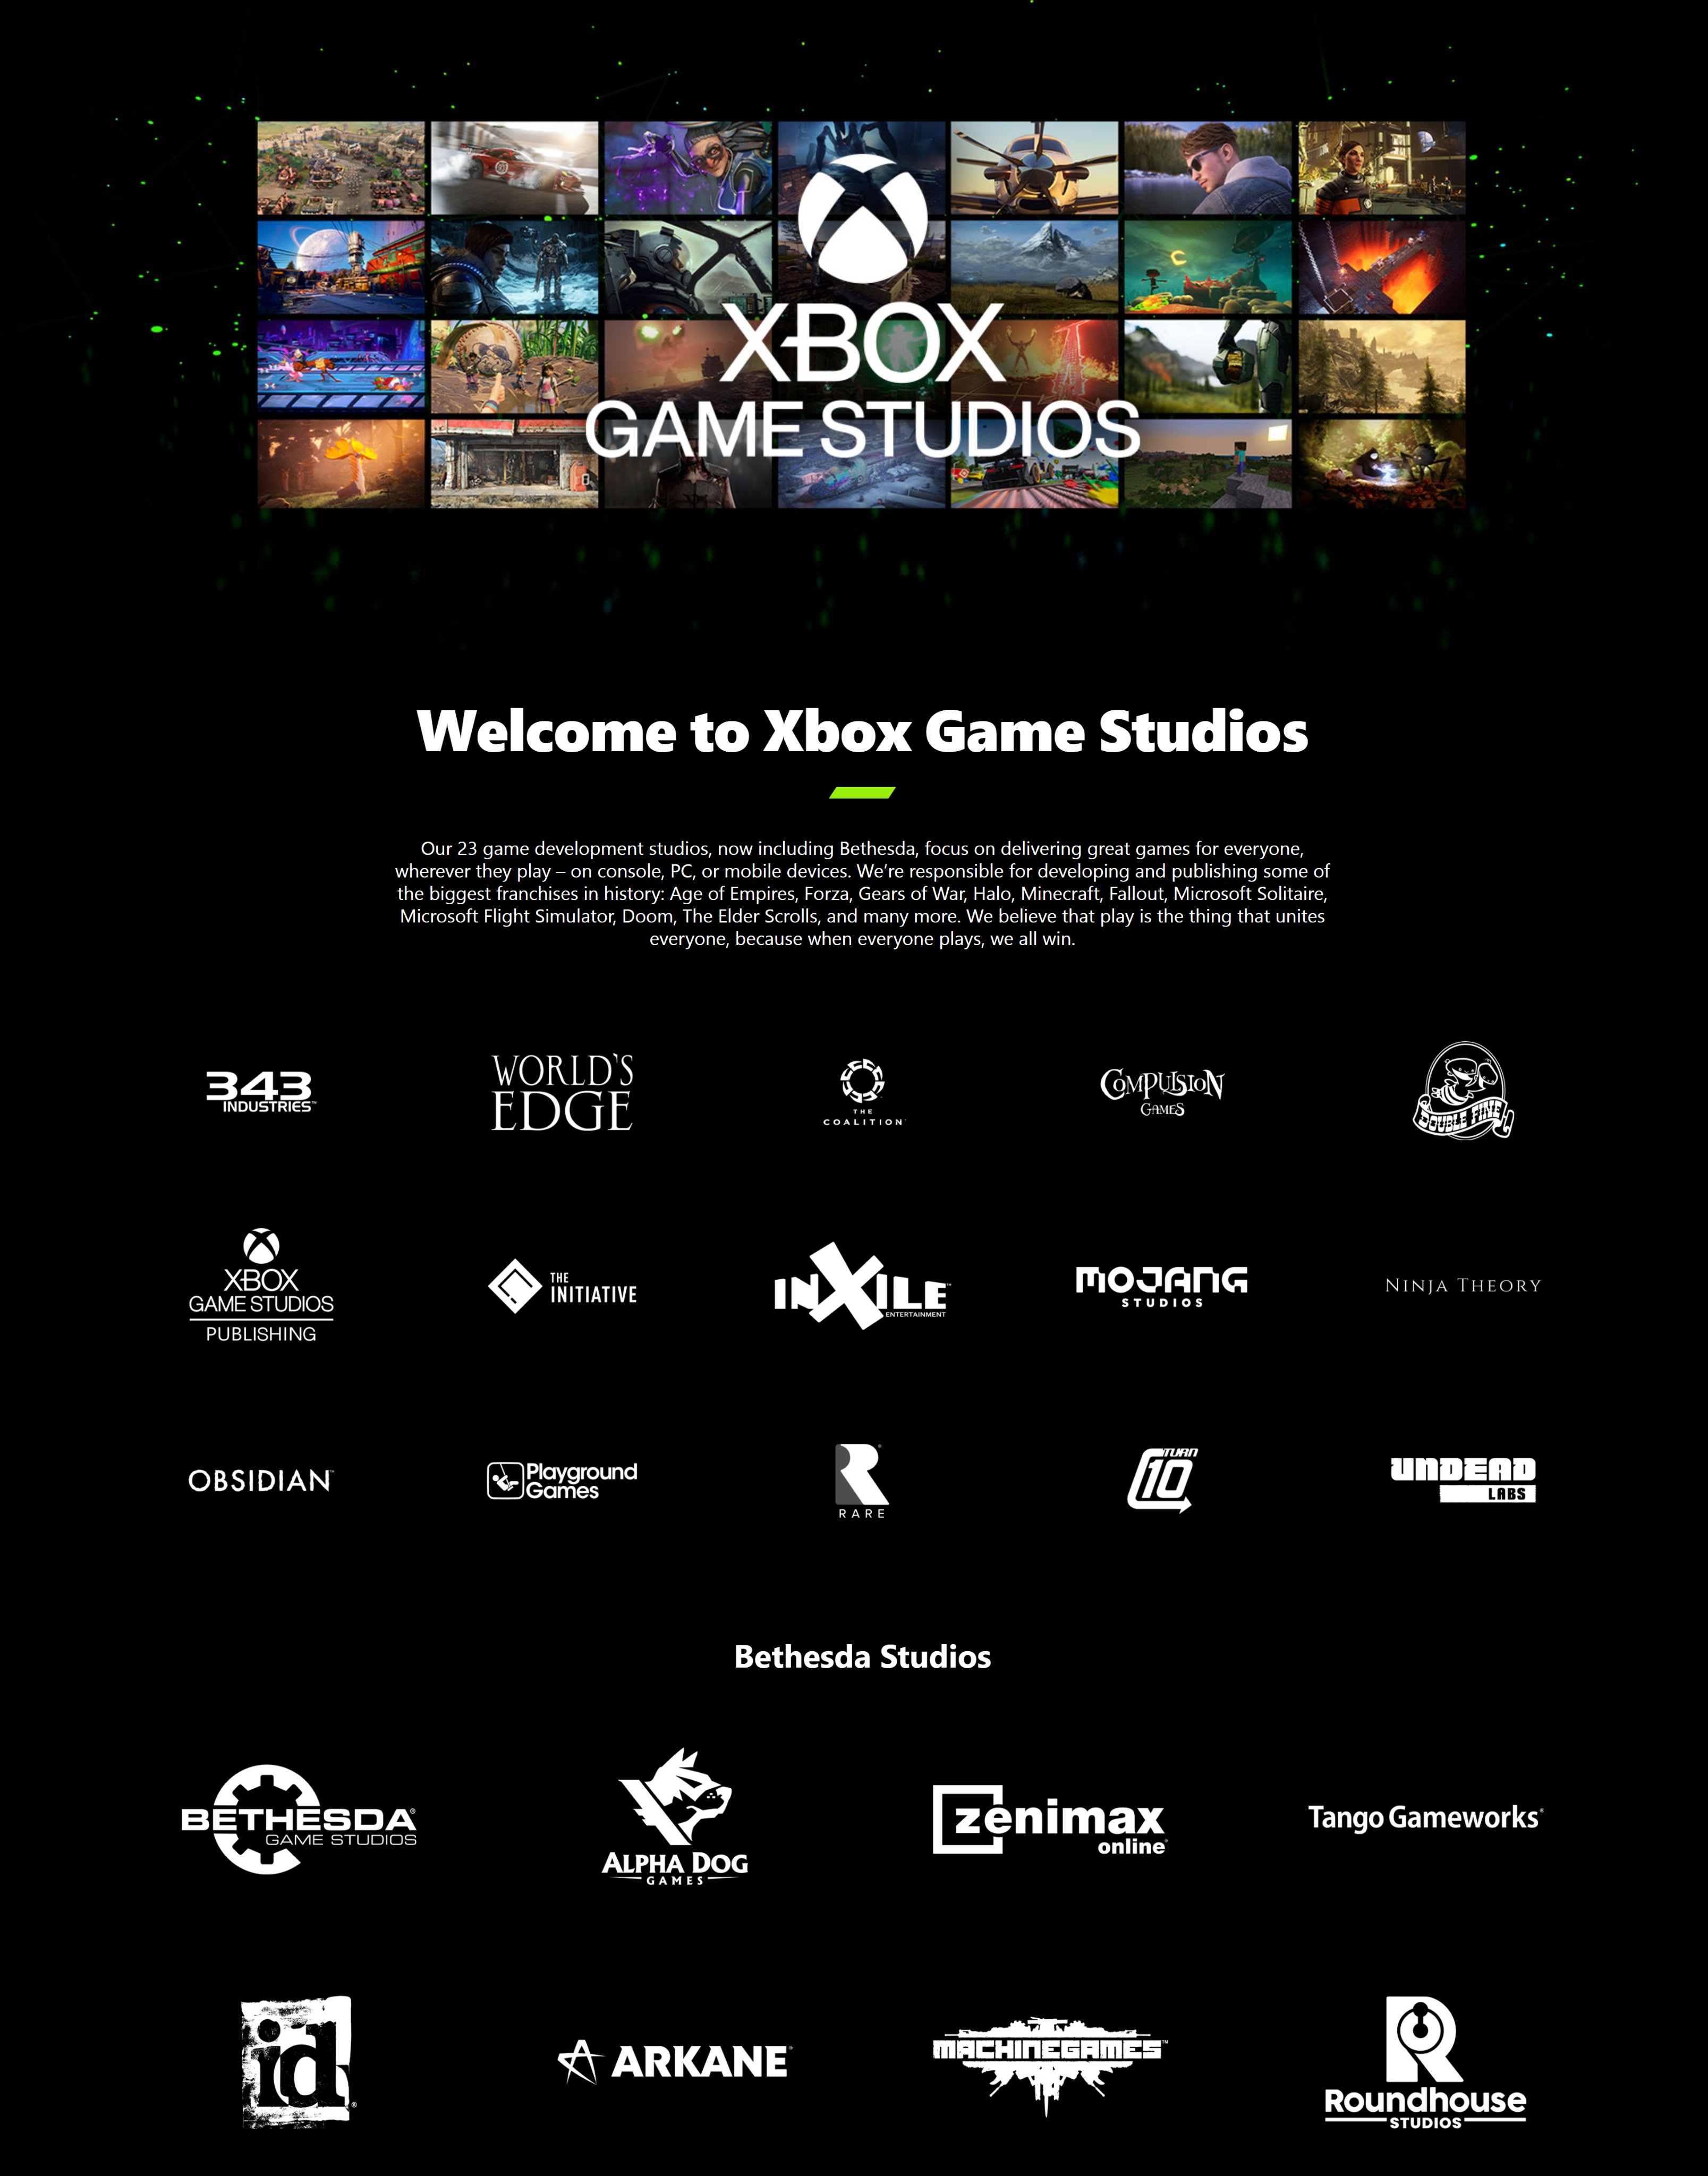 Xbox Game Studios: What's coming next from every first-party team?